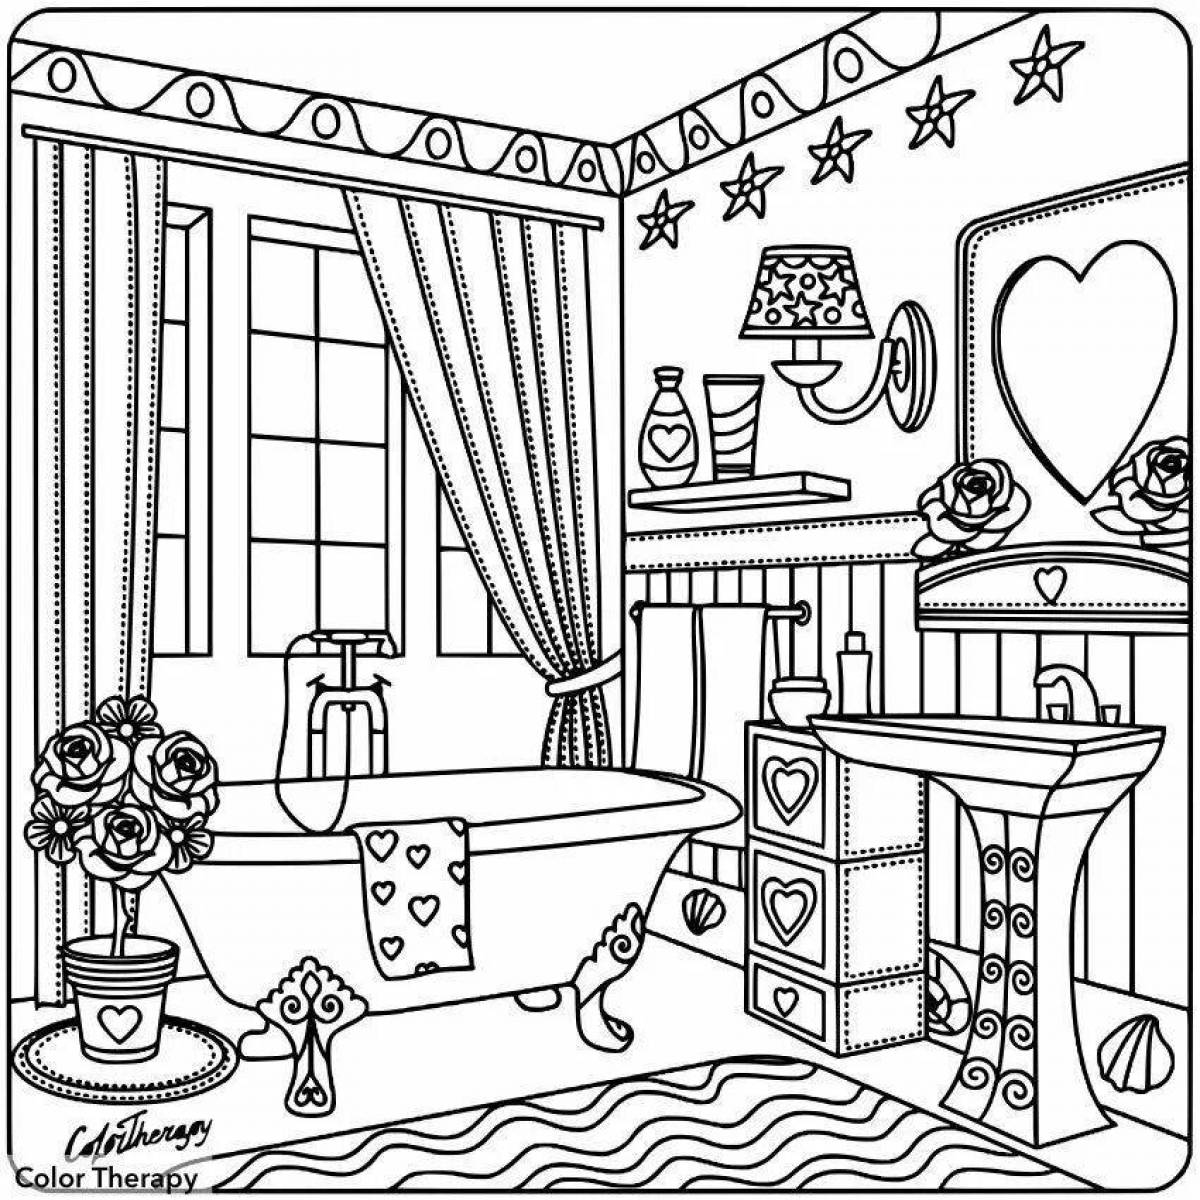 Luxury girl's room coloring book